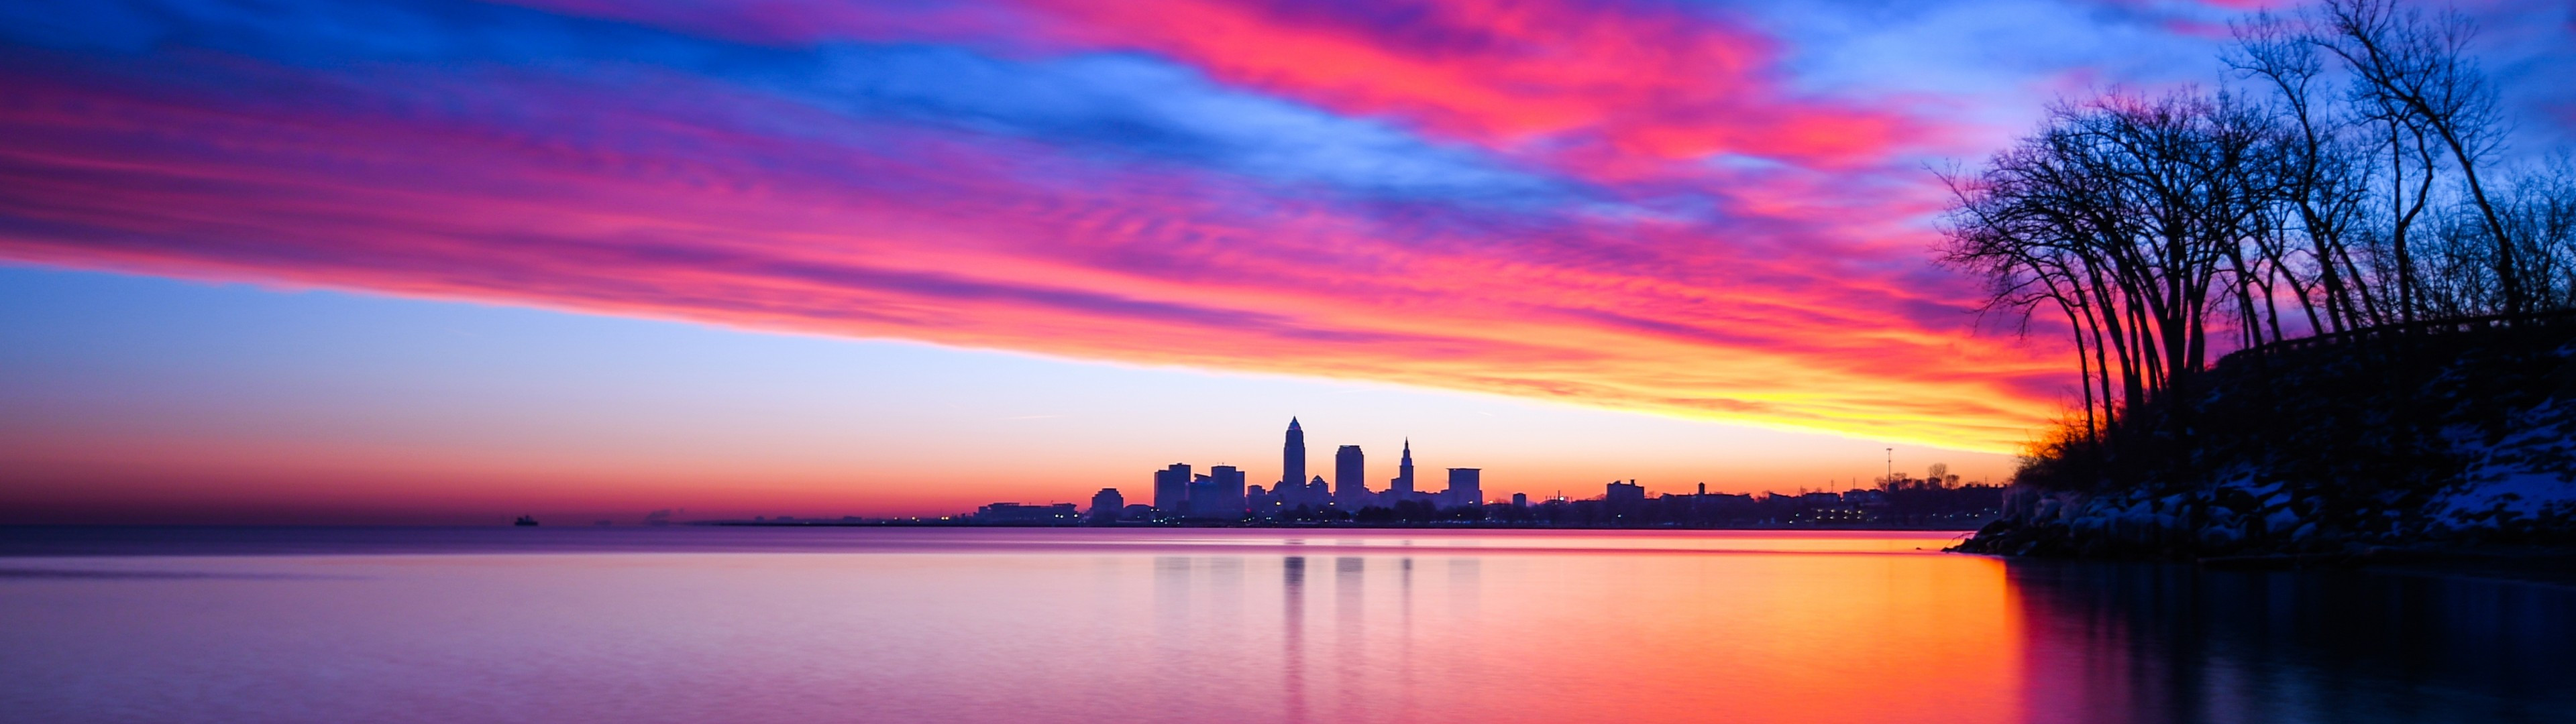 Download 3840x1080 United States, Cleveland, Ohio, Sunset, Clouds, Cityscape, Water, Twilight Wallpaper